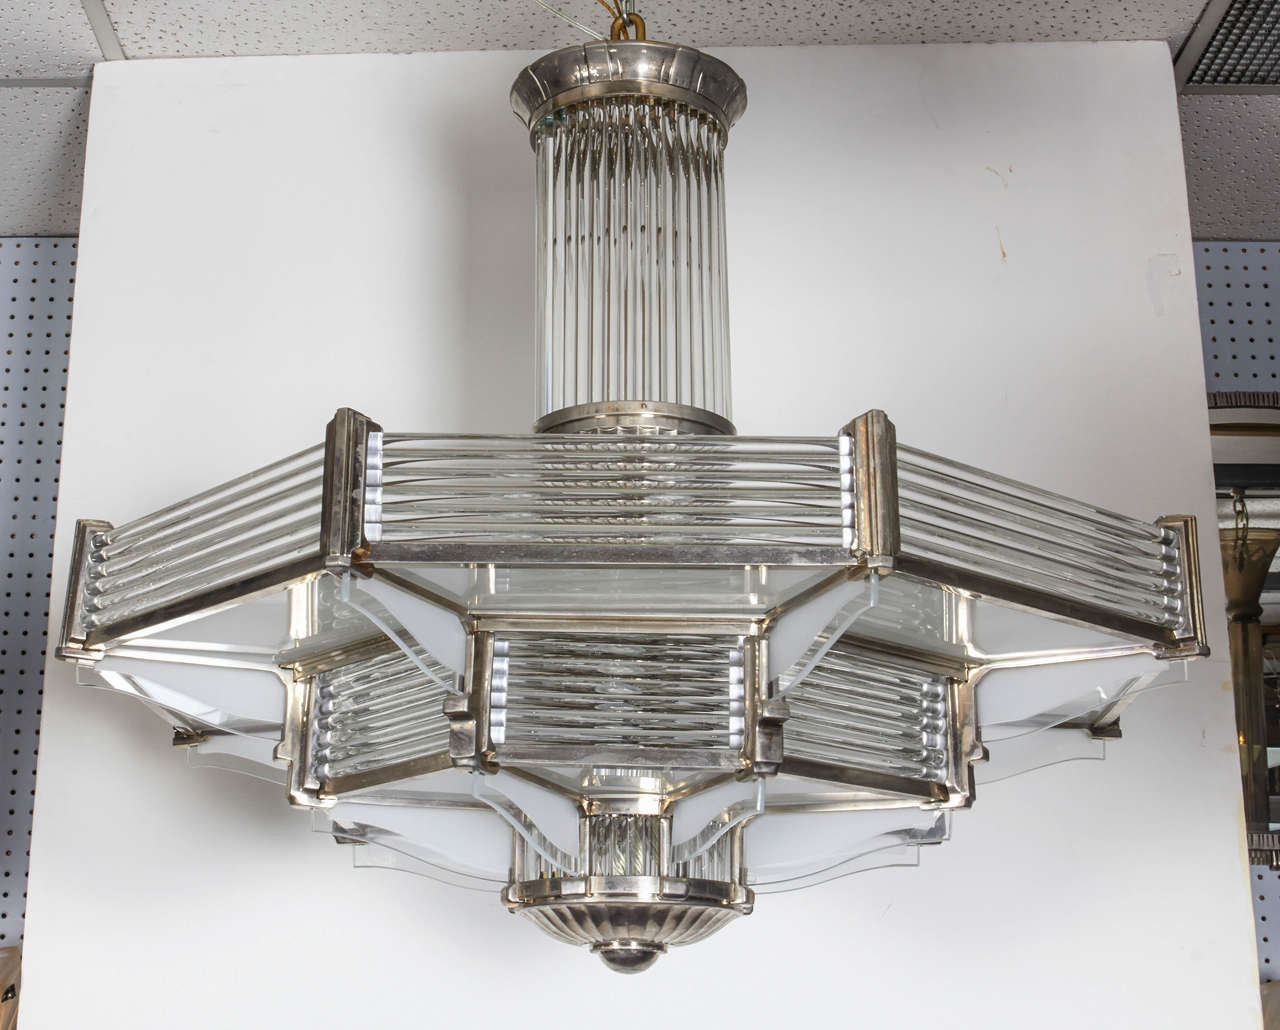 Massive French two-tier octagonally shaped chandelier by Petitot.
Horizontal glass rods, flat frosted glass insets and frosted and polished winged panels are set into a highly polished nickeled bronze armature. The vertical support features an